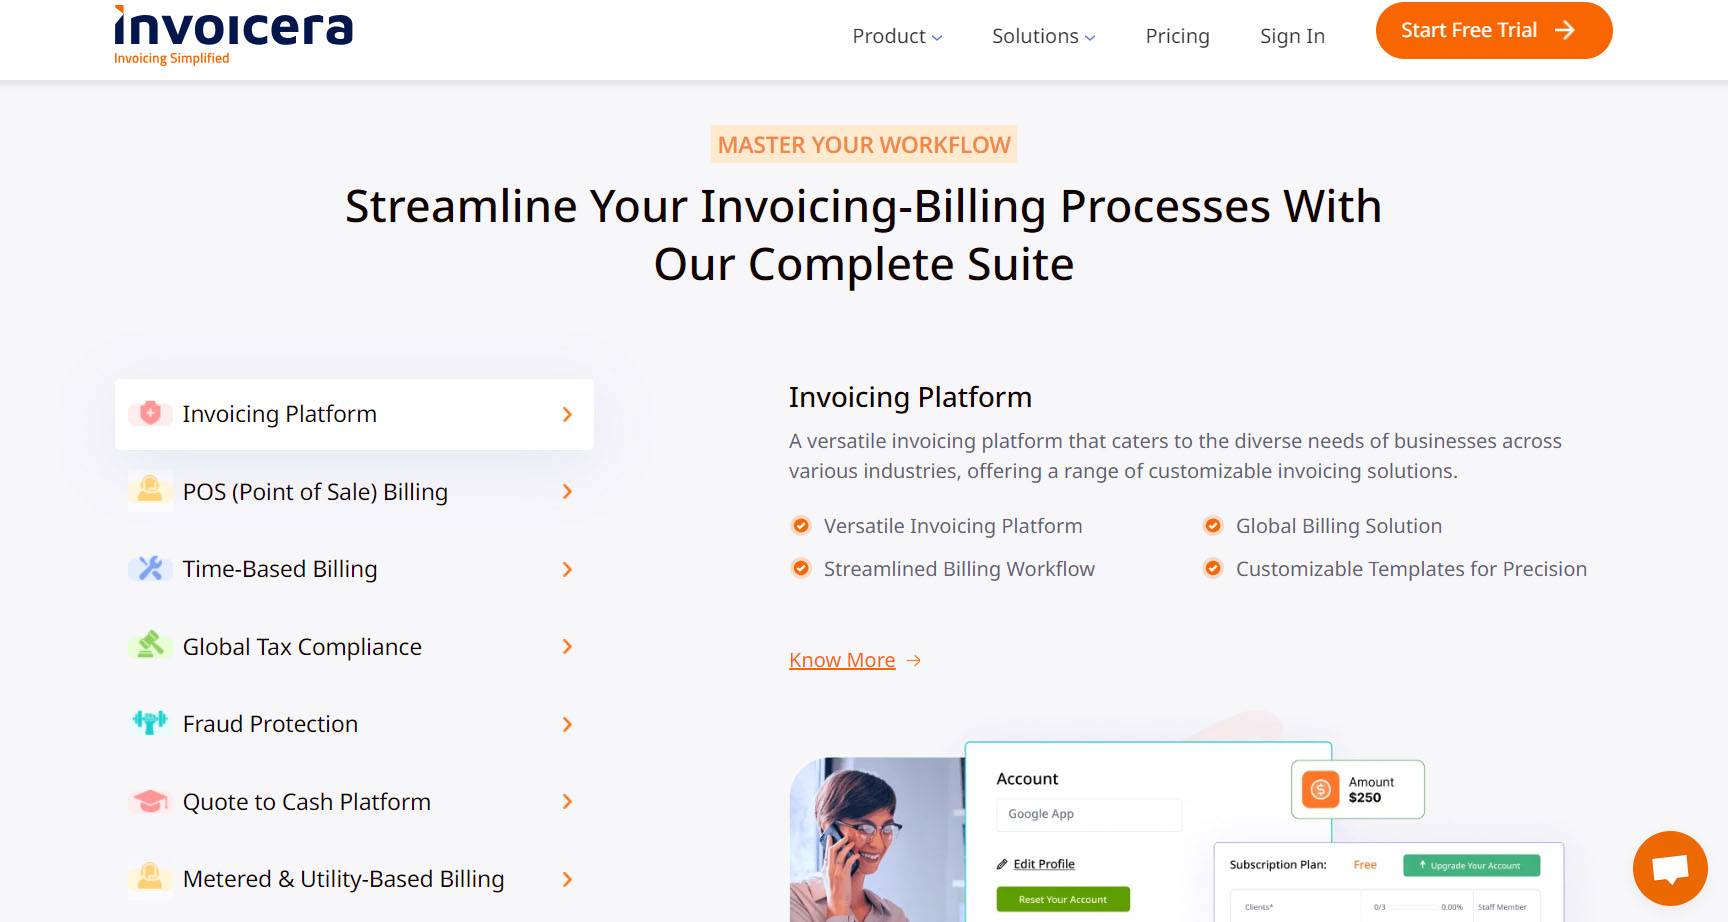 Invoicera Billing Software Review: What Invoicera Billing Software Offers